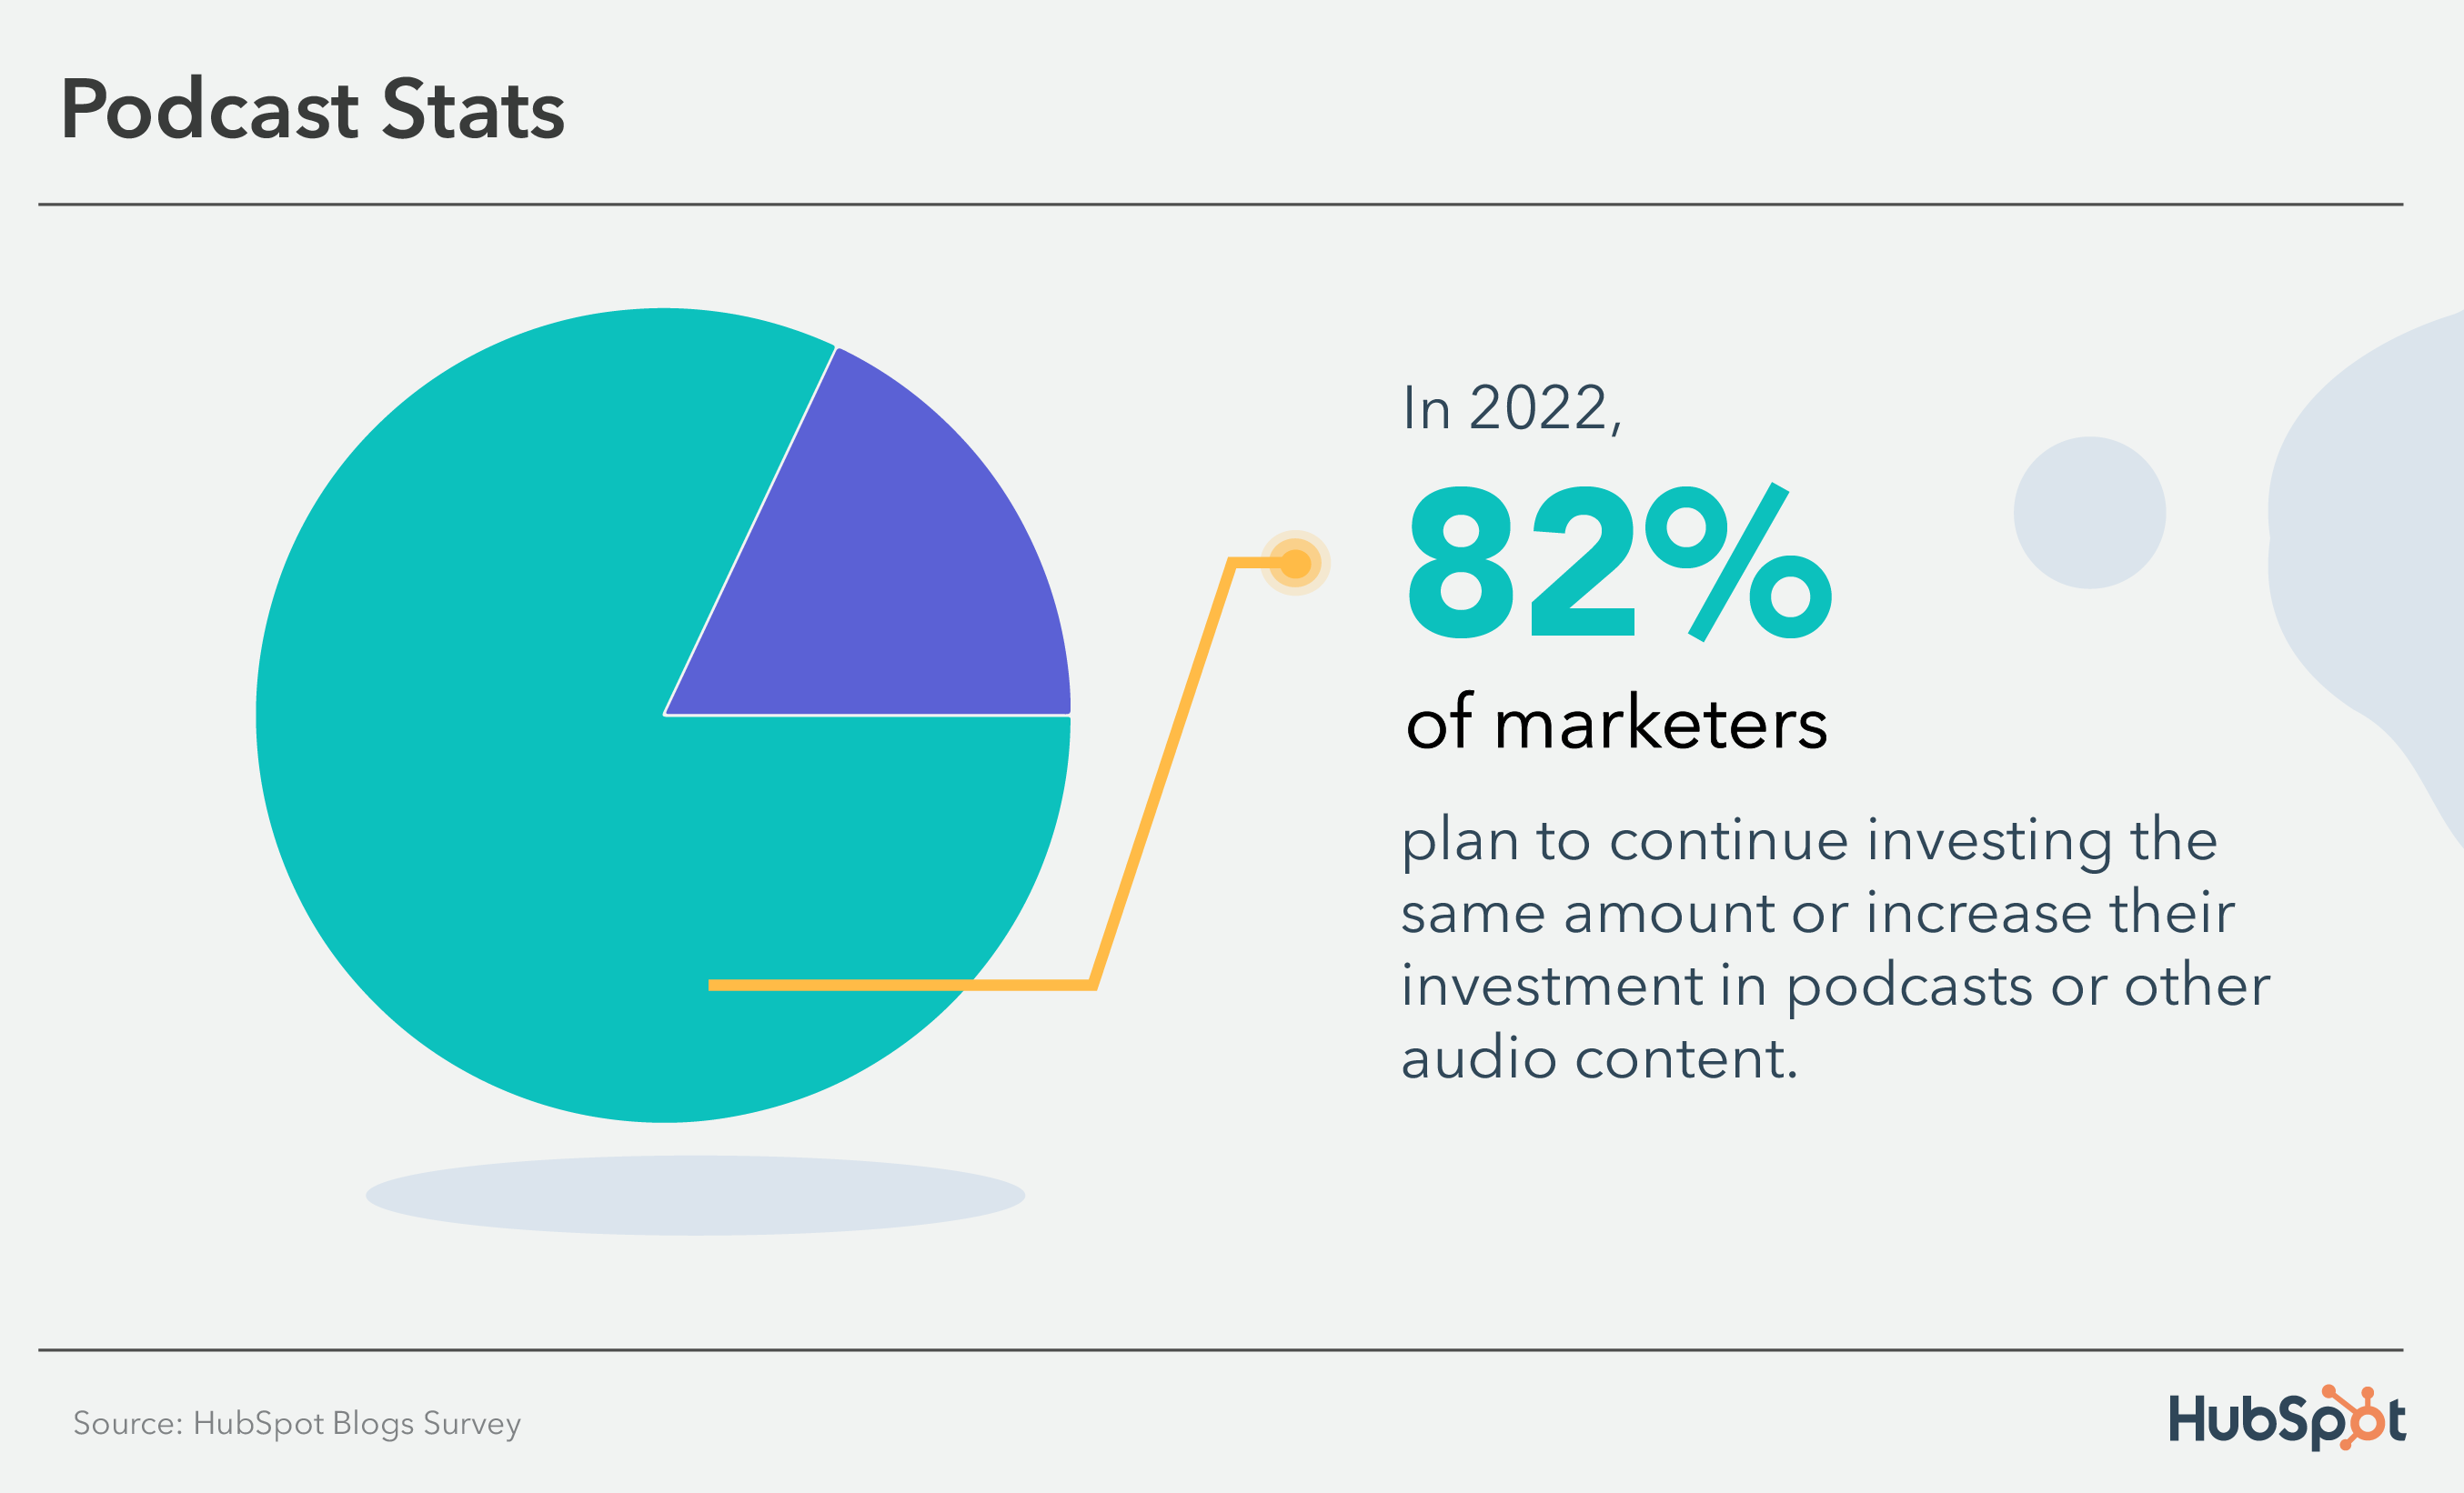  82% of marketers plan to continue investing in audio content